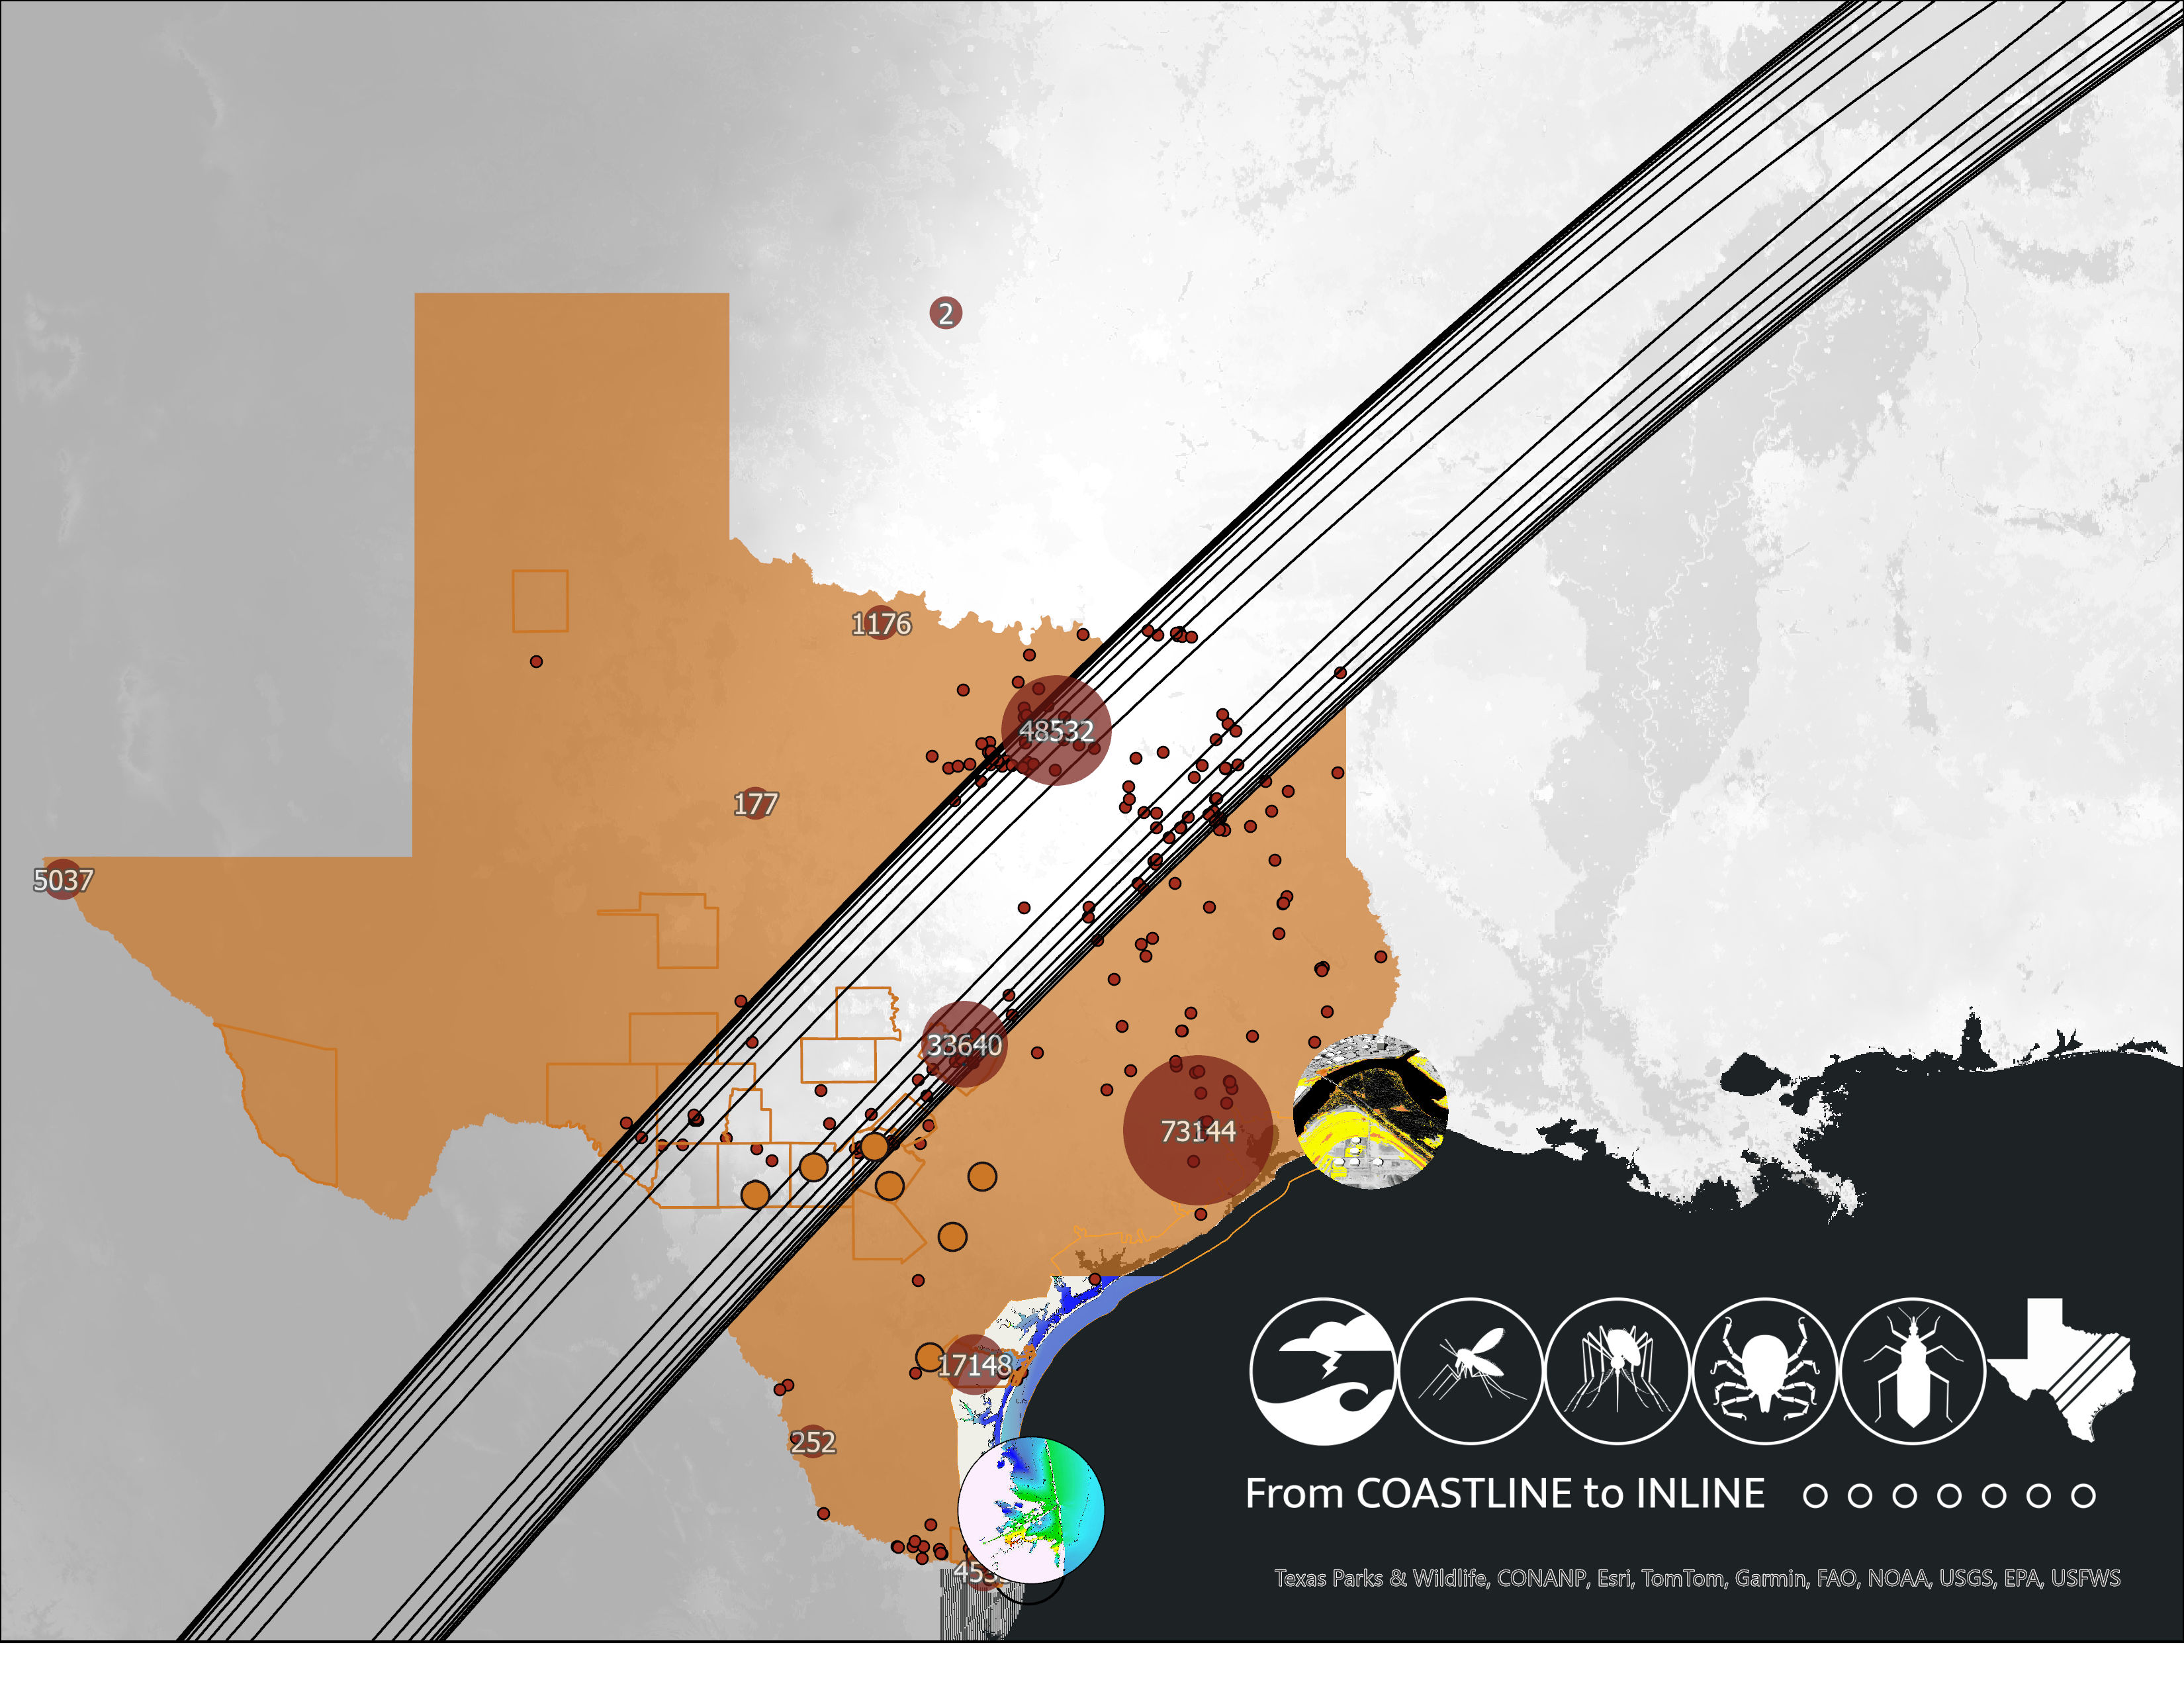 Project data provided by FloDisMod Team, Computational Hydraulics Group, Oden Institute, University of Texas at Austin, NOAA, and TINRIS. Credit: Data visualization compilation, Madison Russ